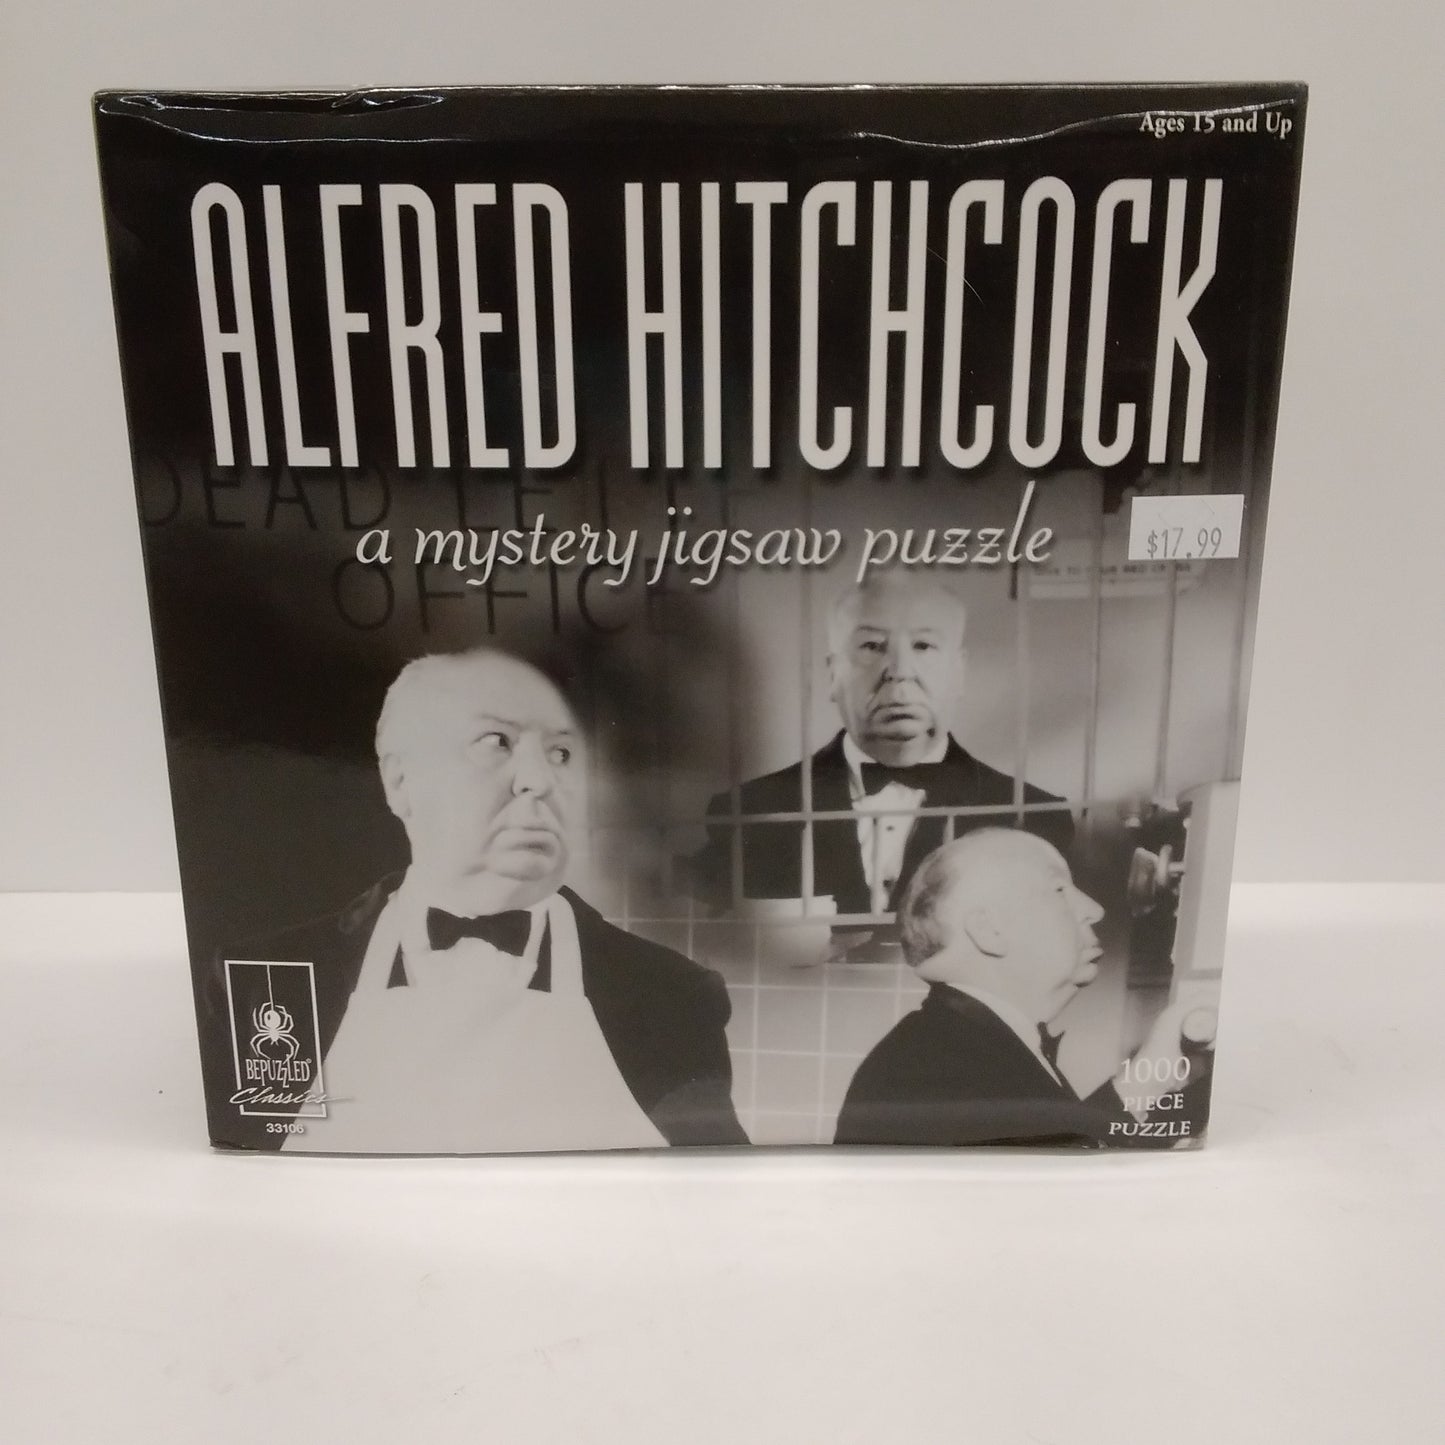 Alfred Hitchcock A Mystery Jigsaw Puzzle